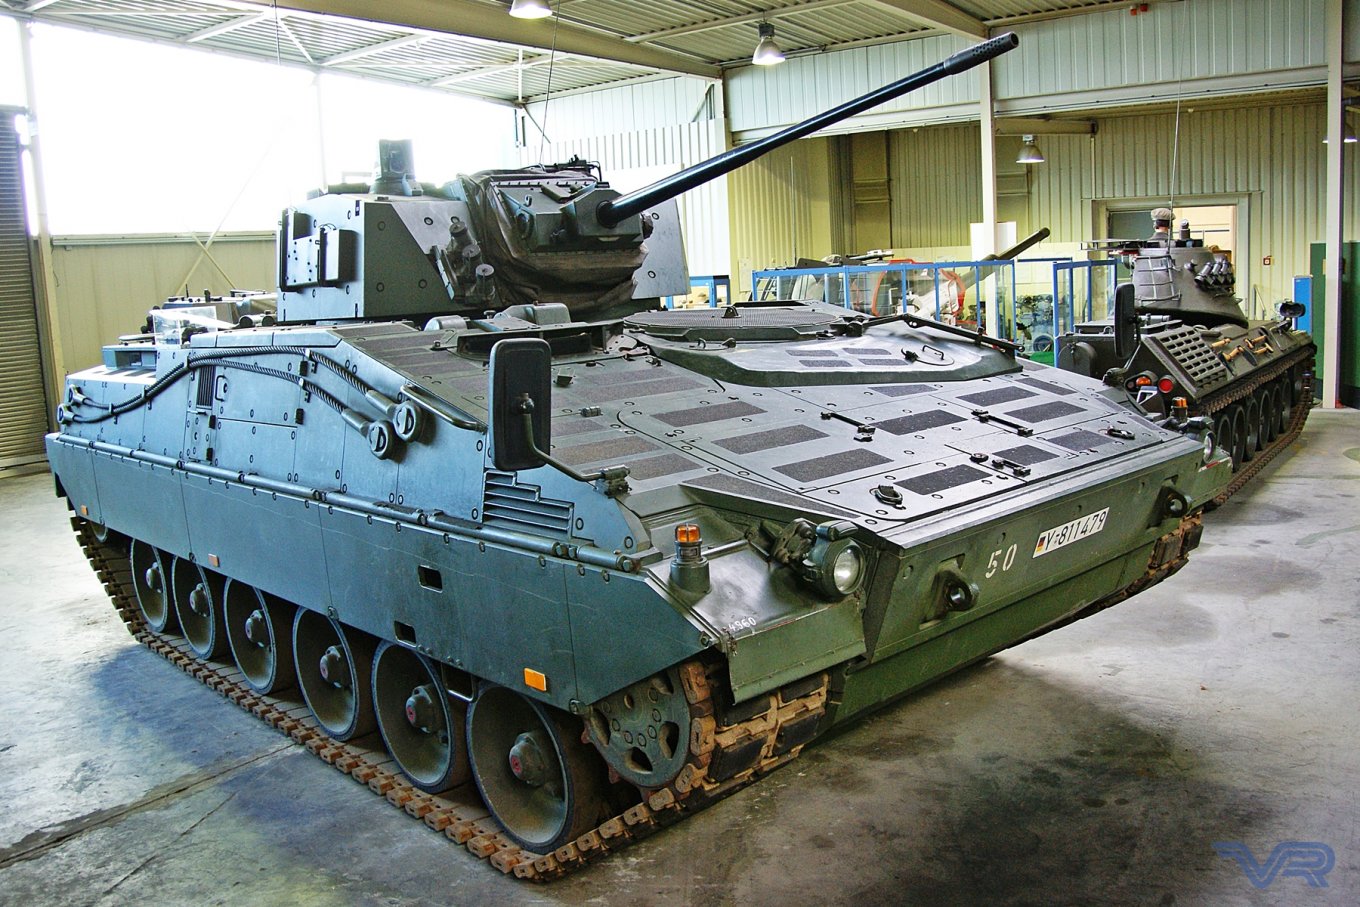 Defense Express / Marder 2 Infantry Fighting Vehicle / Germany Stays Reluctant to Send Armor to Ukraine